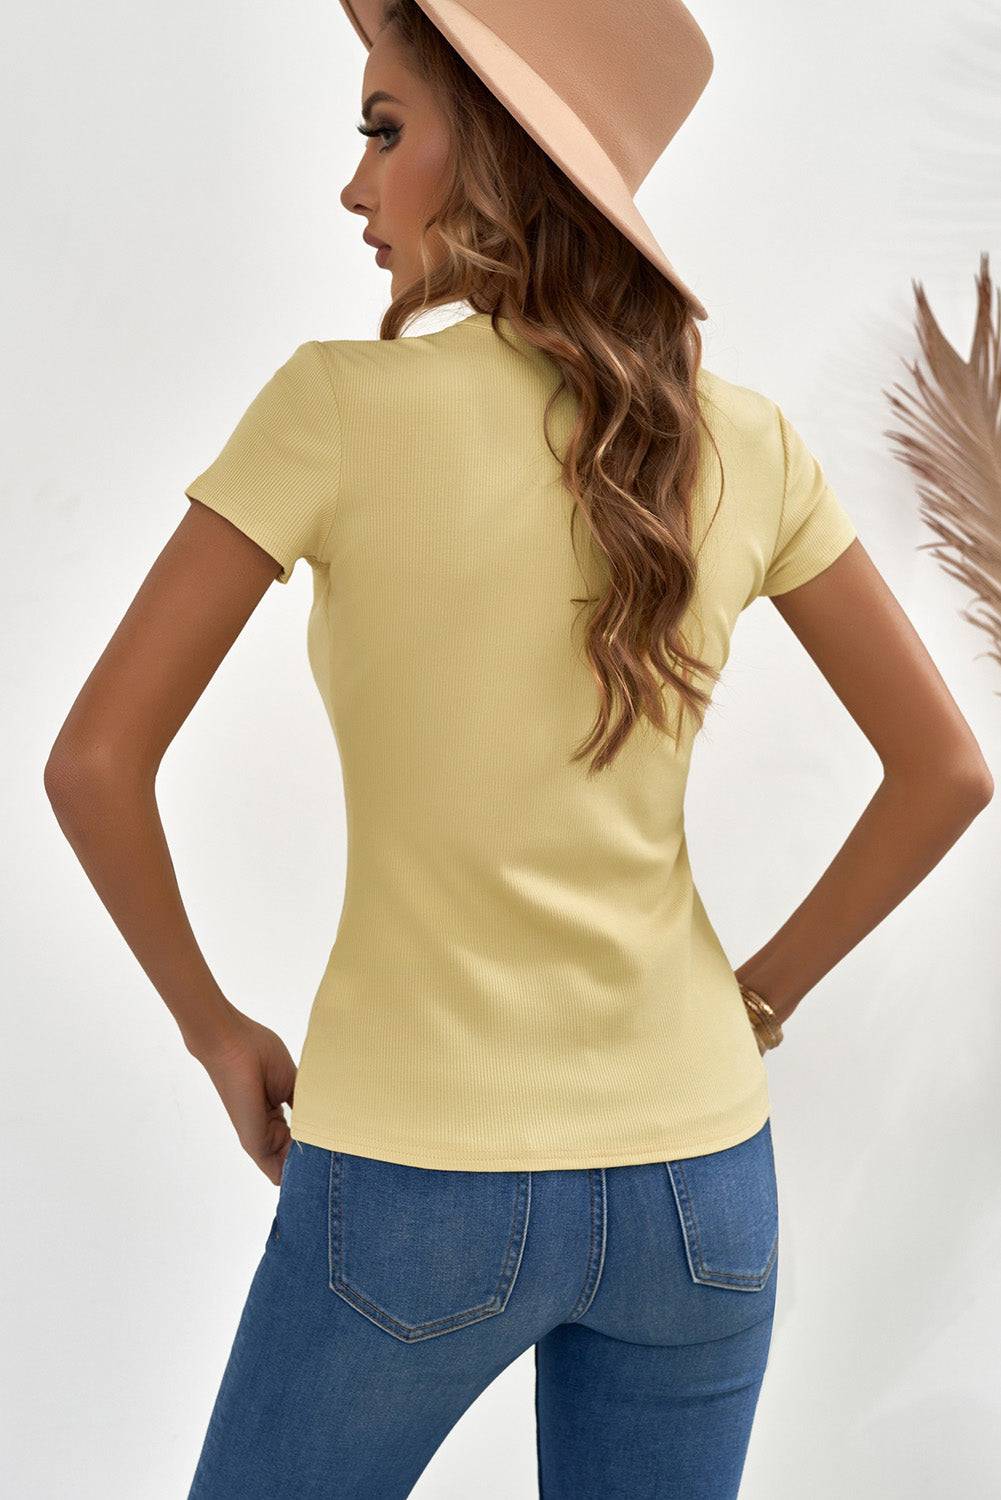 Indulge in the Beauty of Simplicity with Our Buttoned Short Sleeve Tee Shirt - Effortless Glamour That Hugs Your Curves and Accentuates Your Natural Beauty. - Guy Christopher